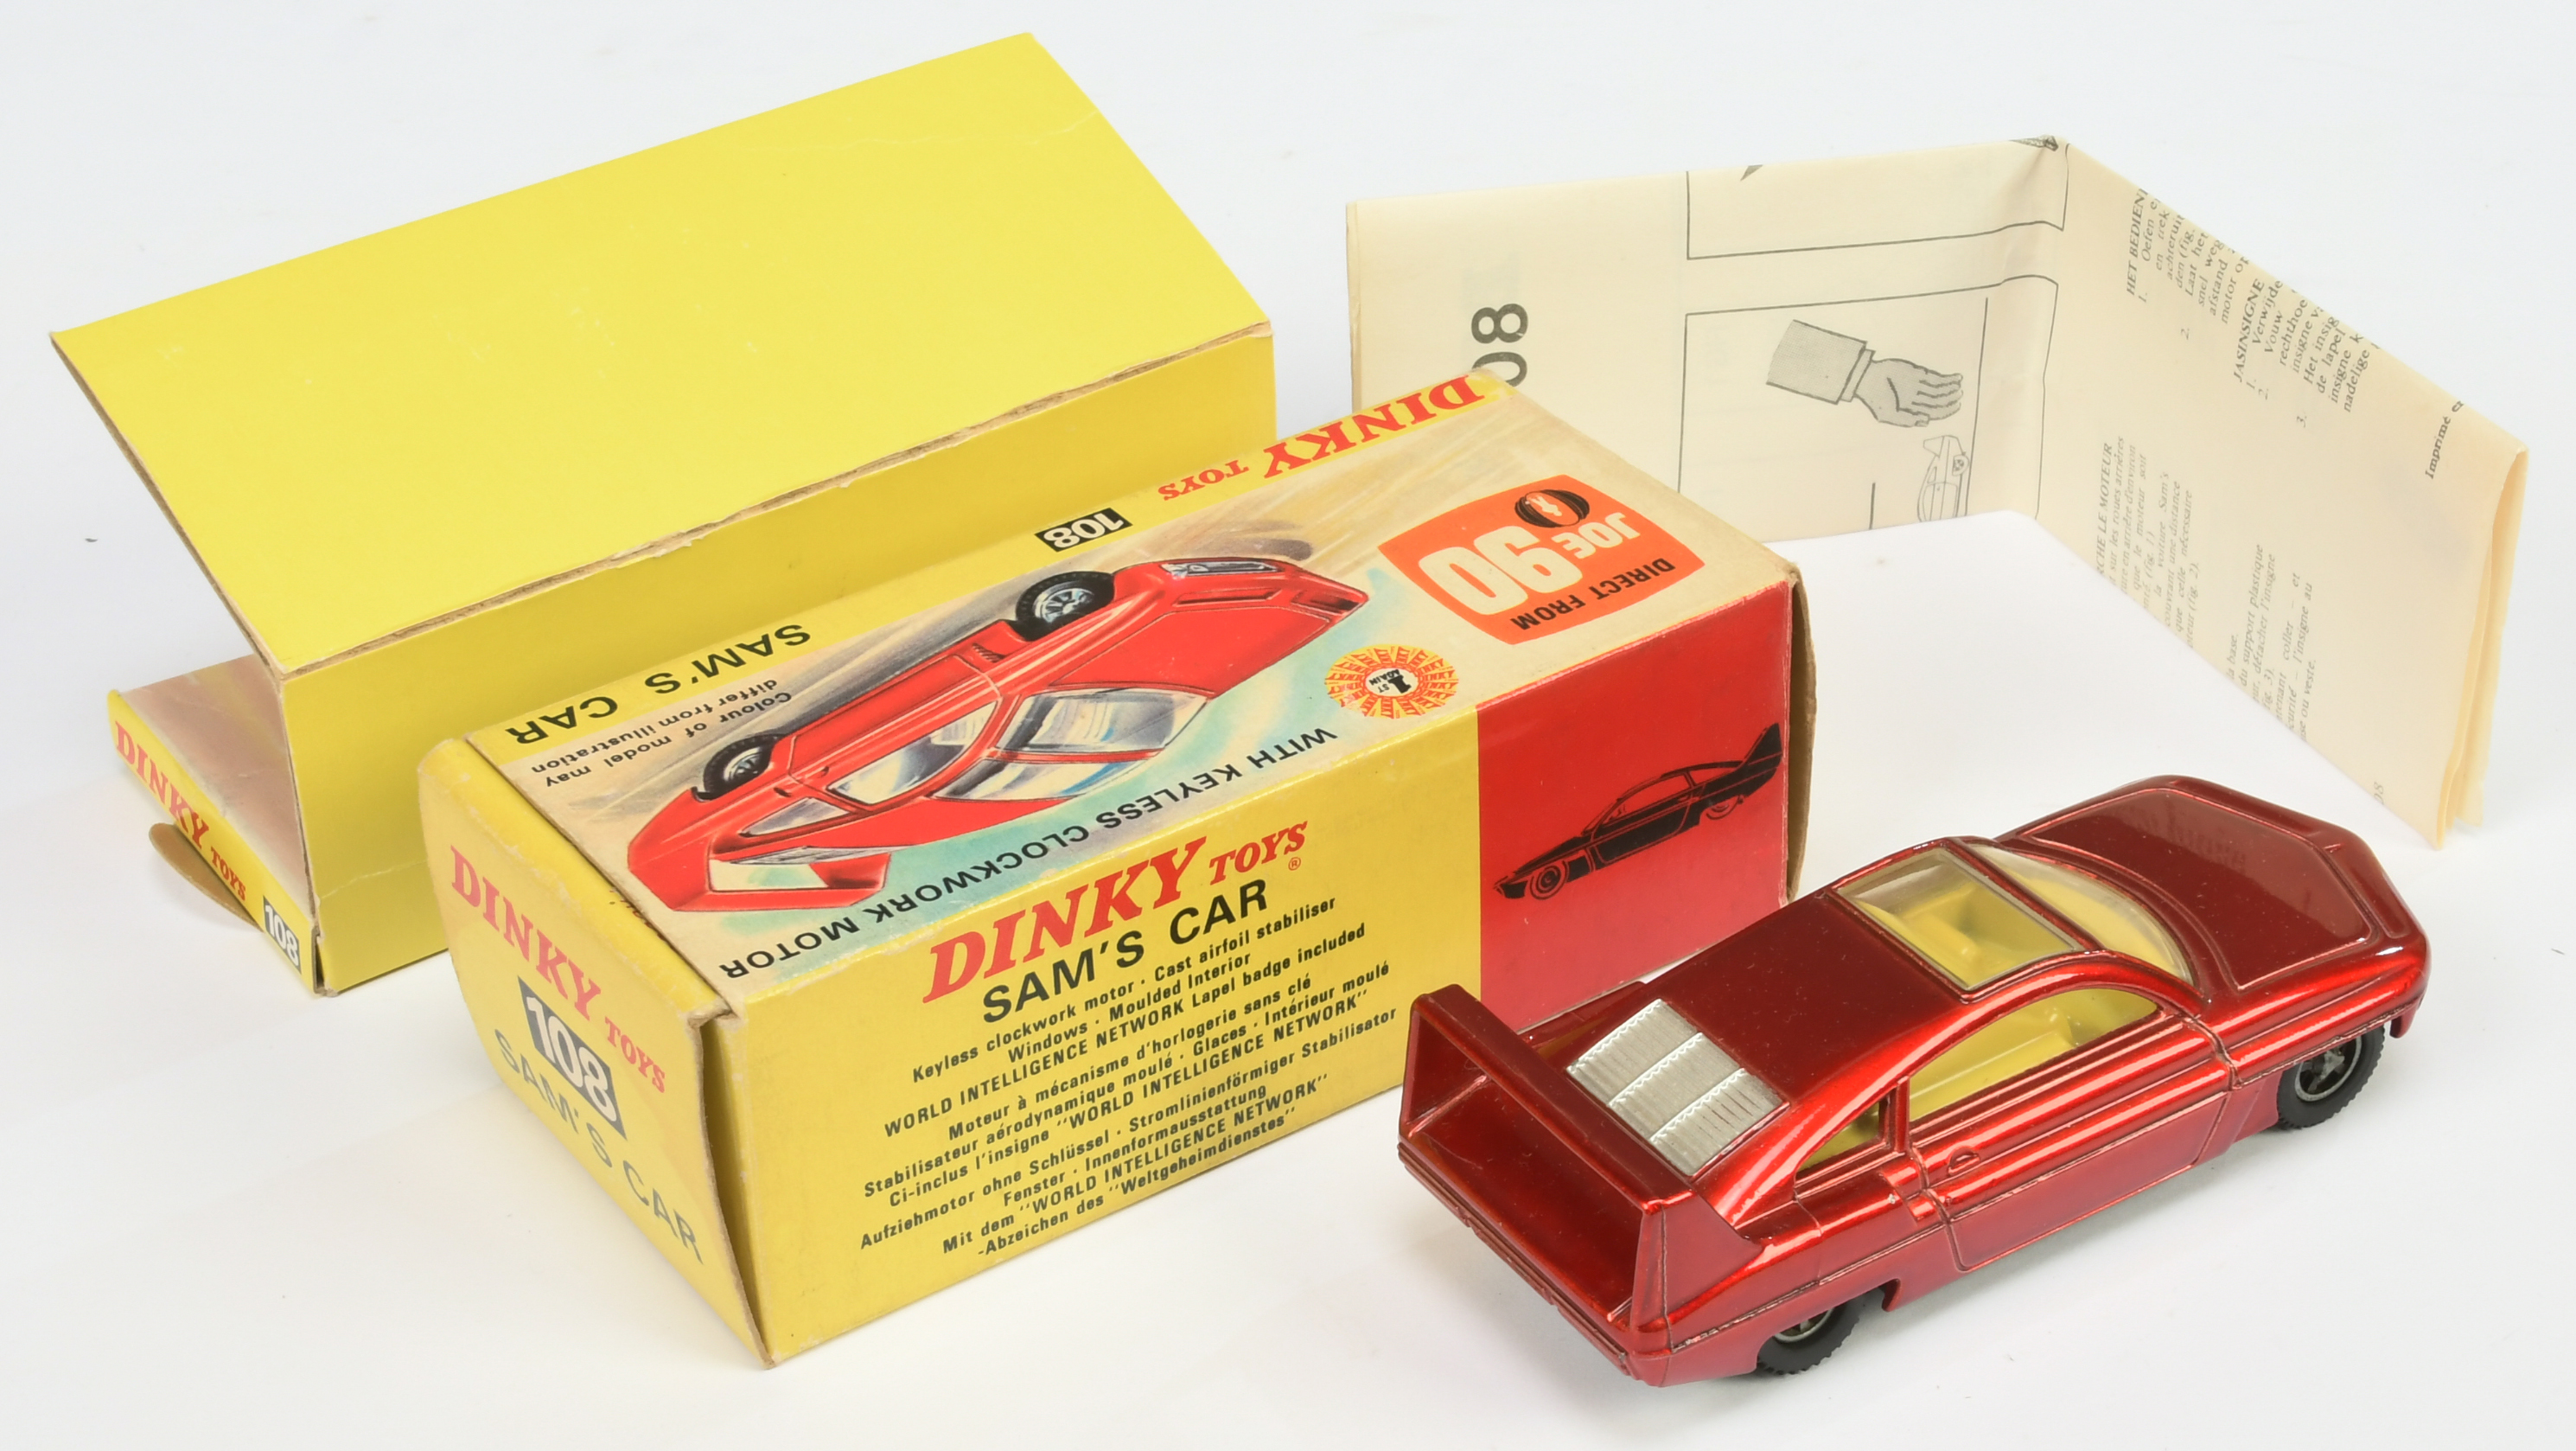 Dinky Toys 108 "Joe 90" Sam's Car - Metallic red body, yellow interior, silver engine cover, cast... - Image 2 of 2